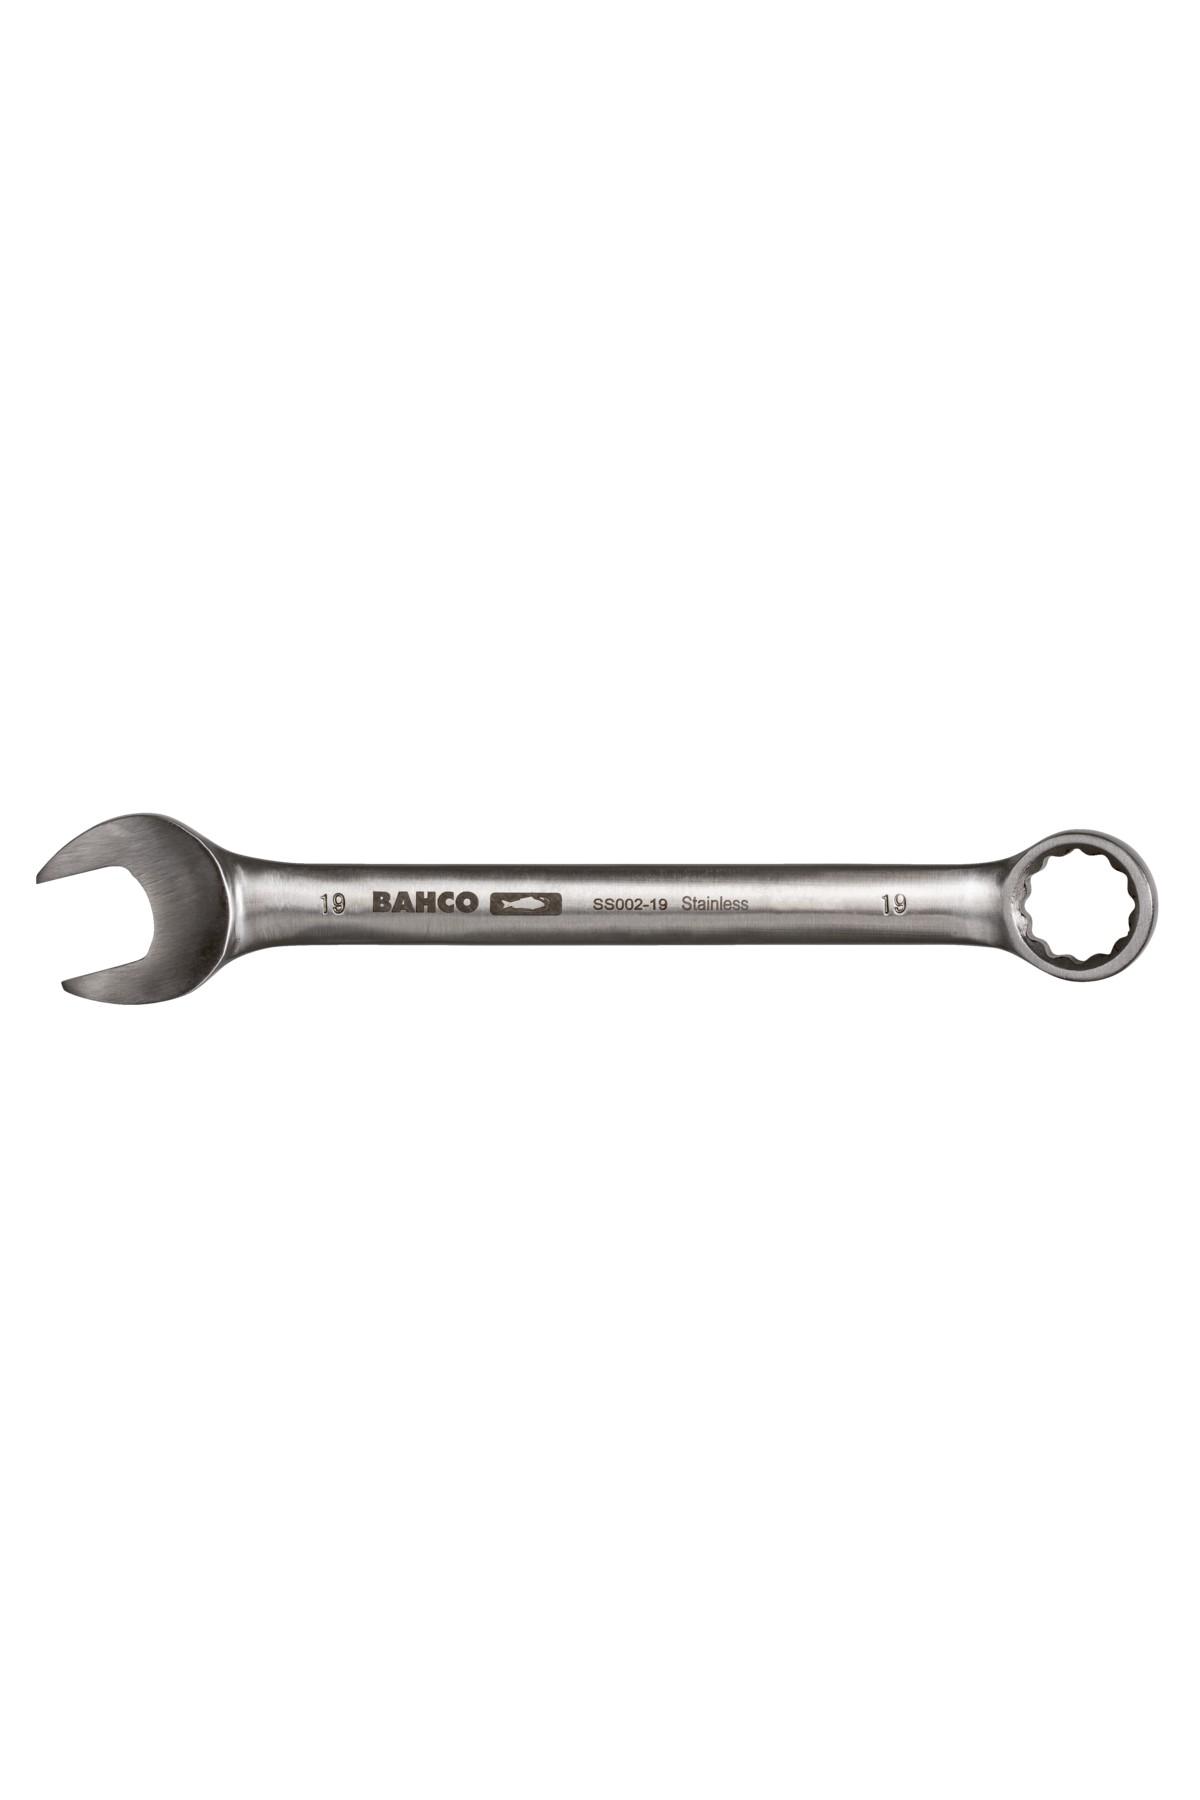 Ring spanner stainless steel 21mm